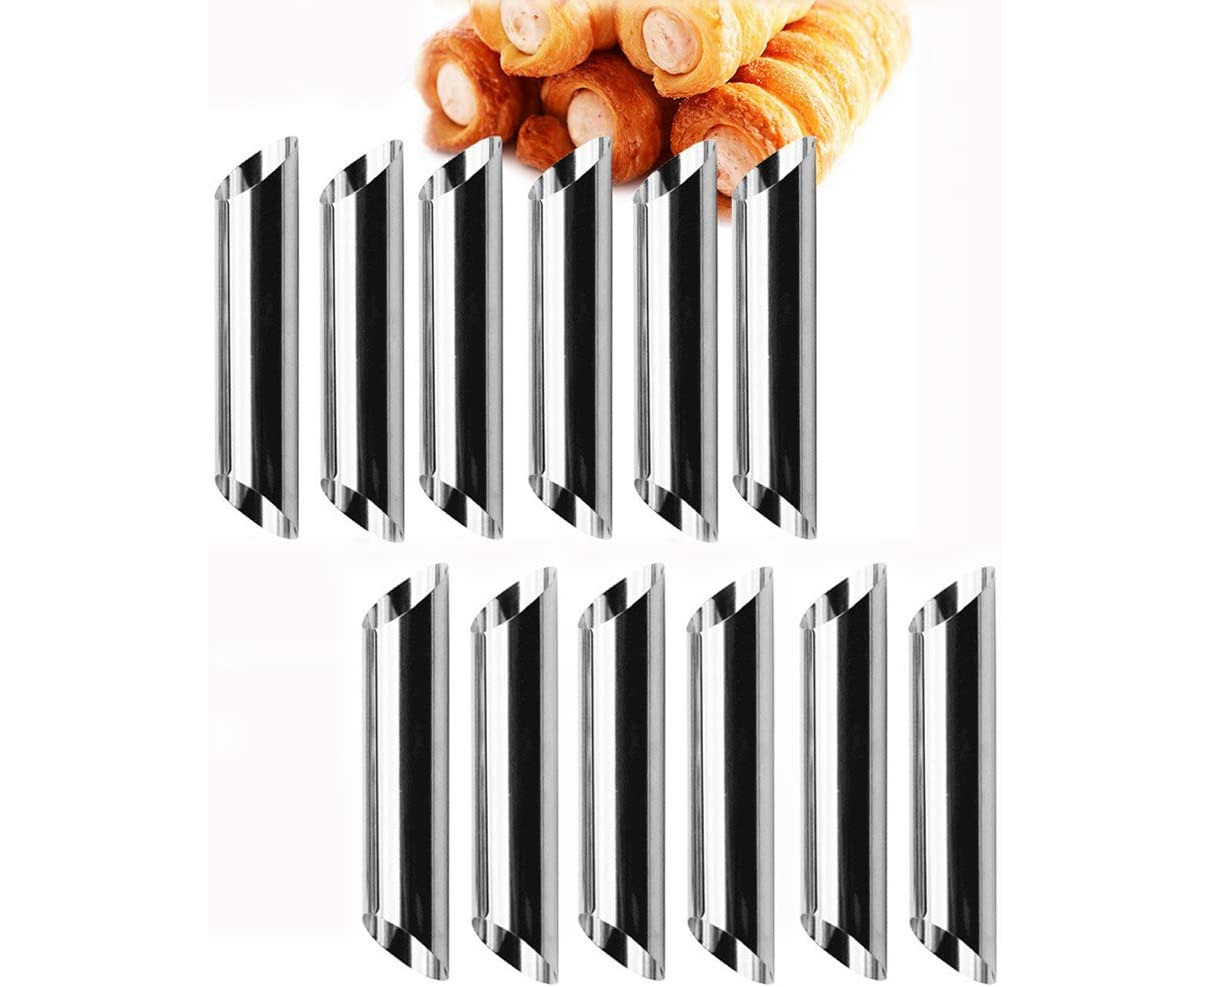 12pcs Cannoli Shapes Cake Mold Stainless Steel Cannoli Tubes shells Horn Cream Horn Pastry Baking Mold Silver 